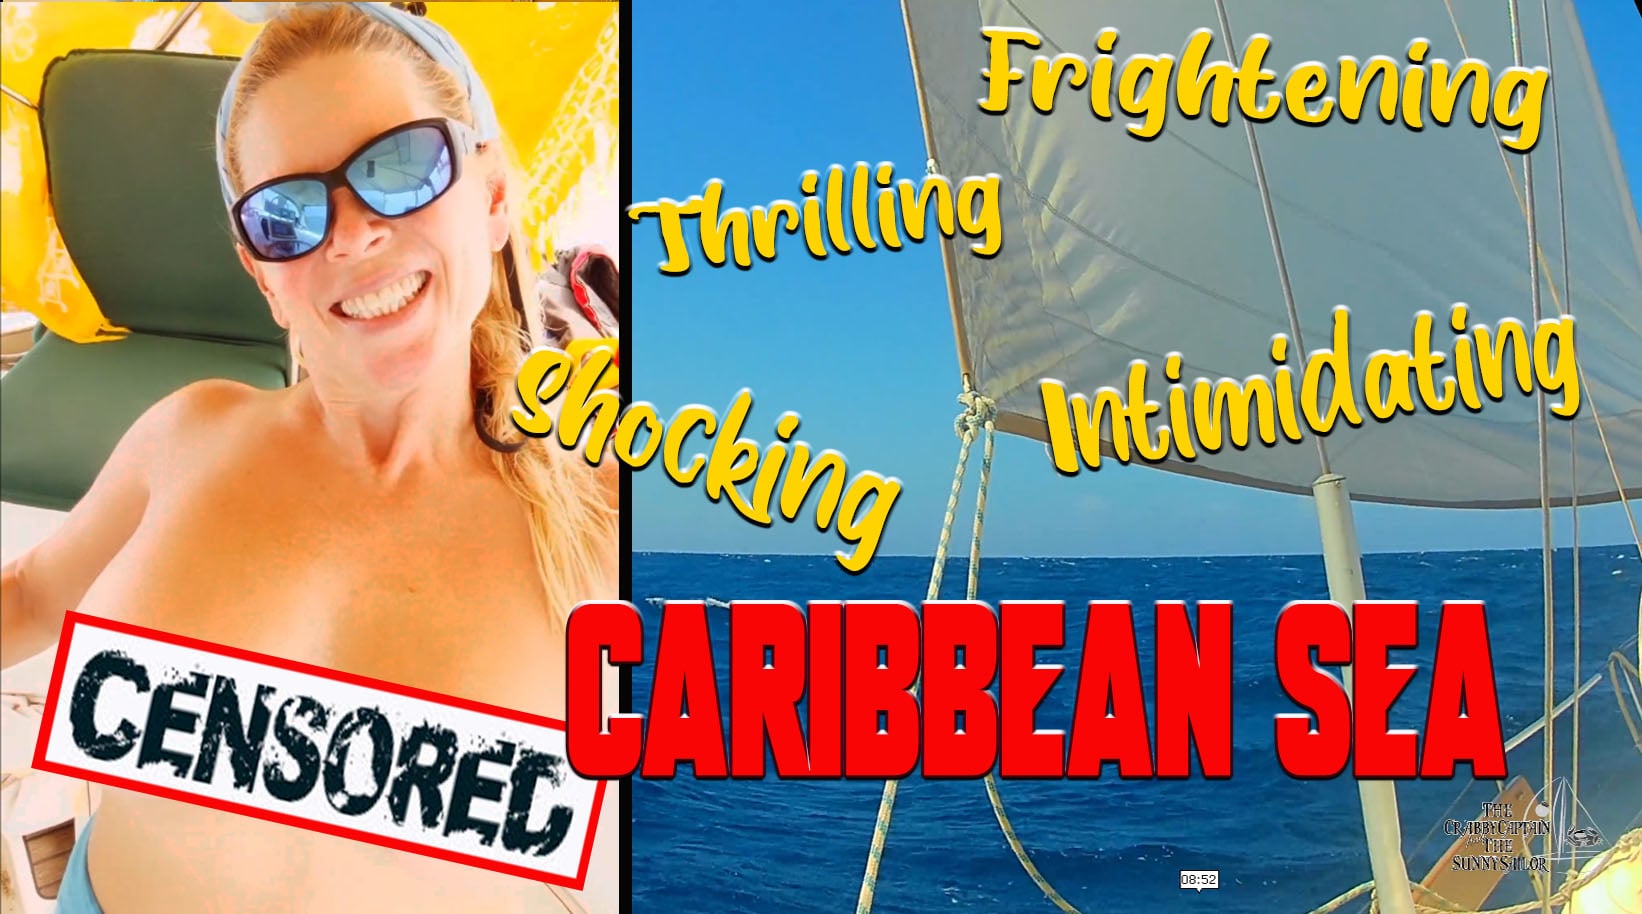 Watch Crabby Captain and Sunny Sailor #74 Caribbean Sea Crossing Online Vimeo On Demand on Vimeo